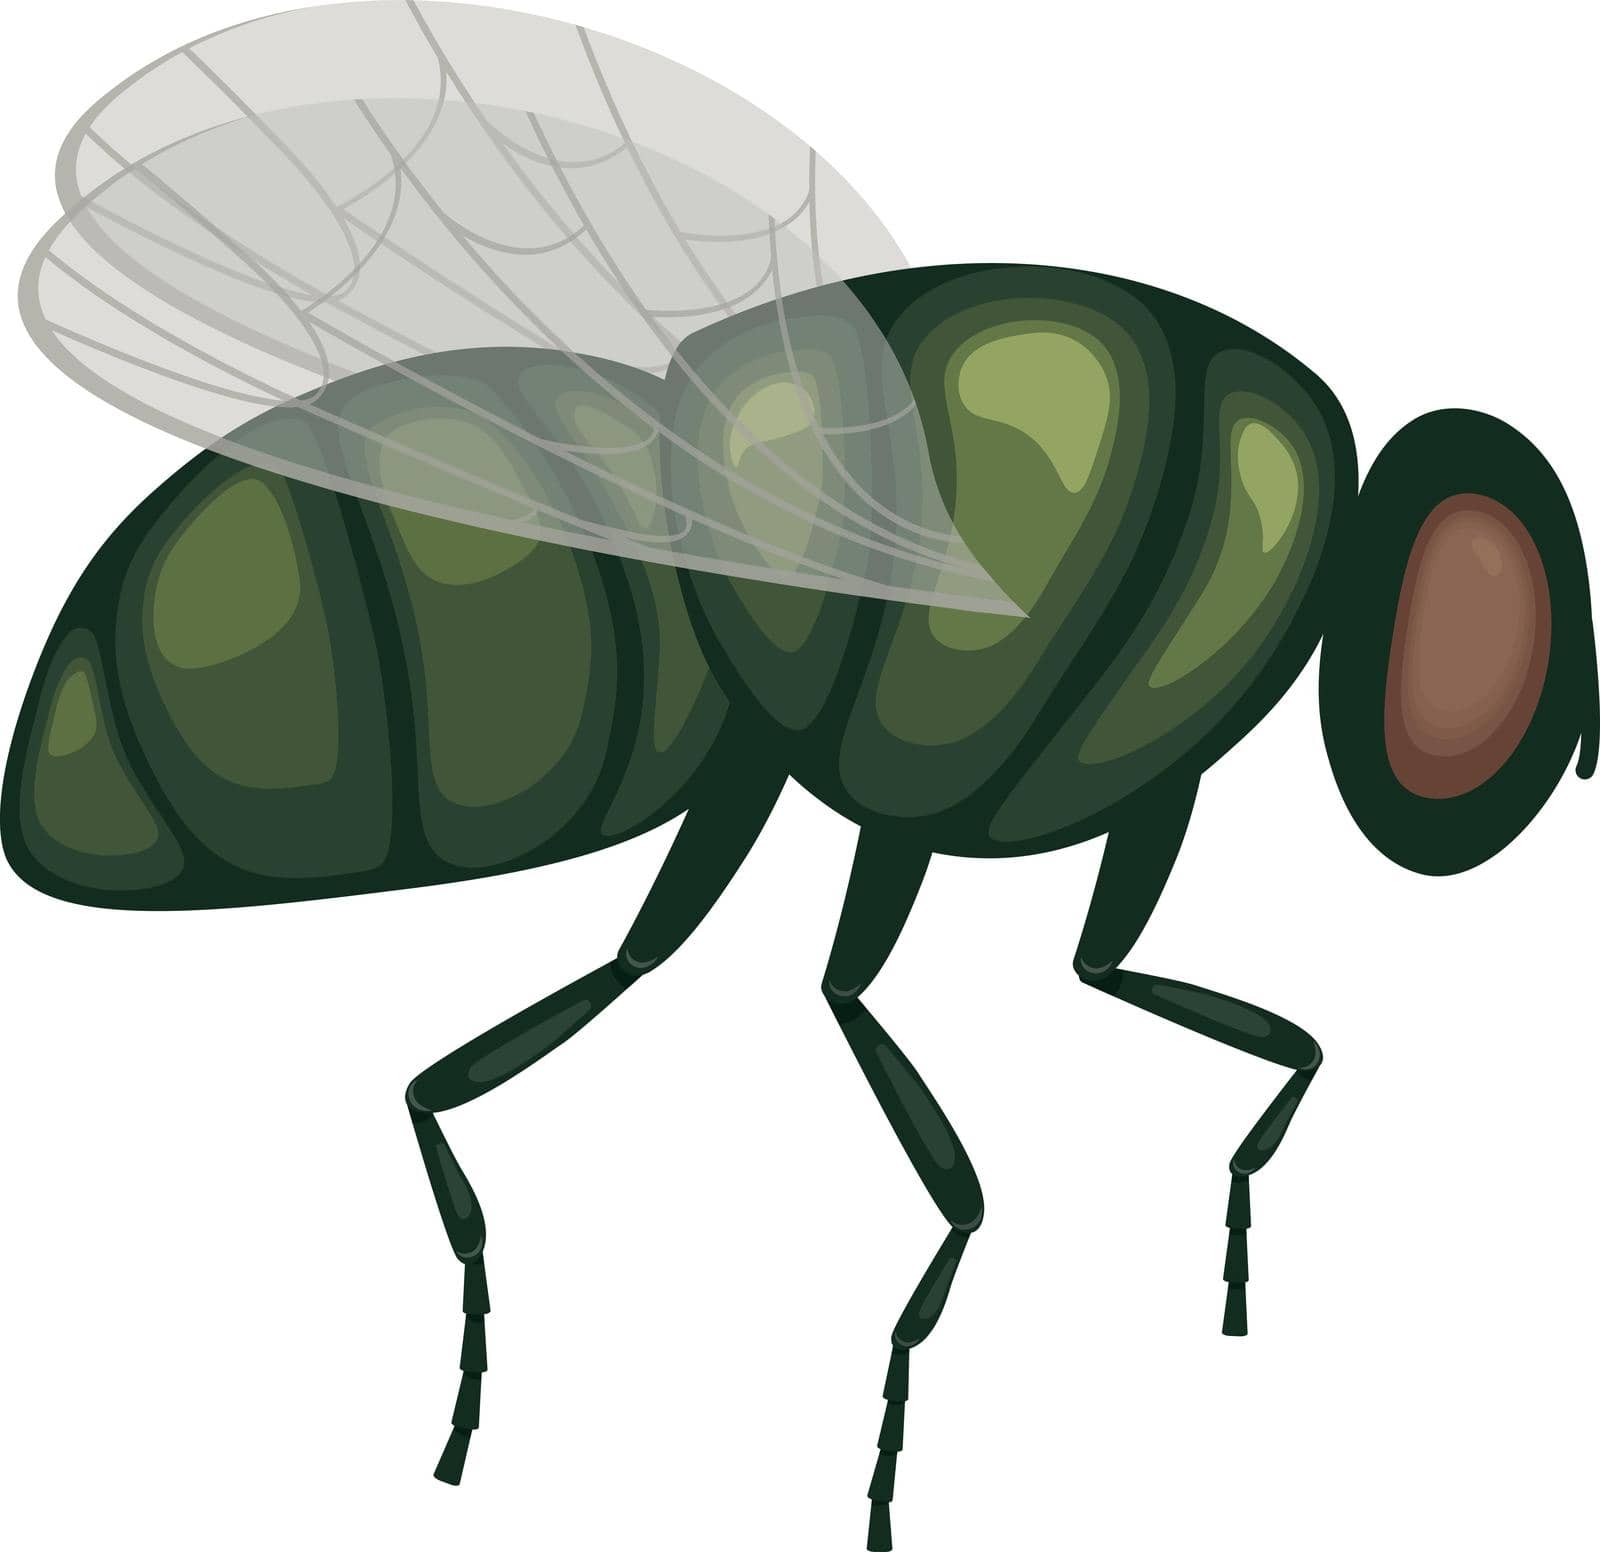 A green fly in flight .A flying insect. Image of a fly, side view. A flying insect. Vector illustration isolated on a white background by NastyaN